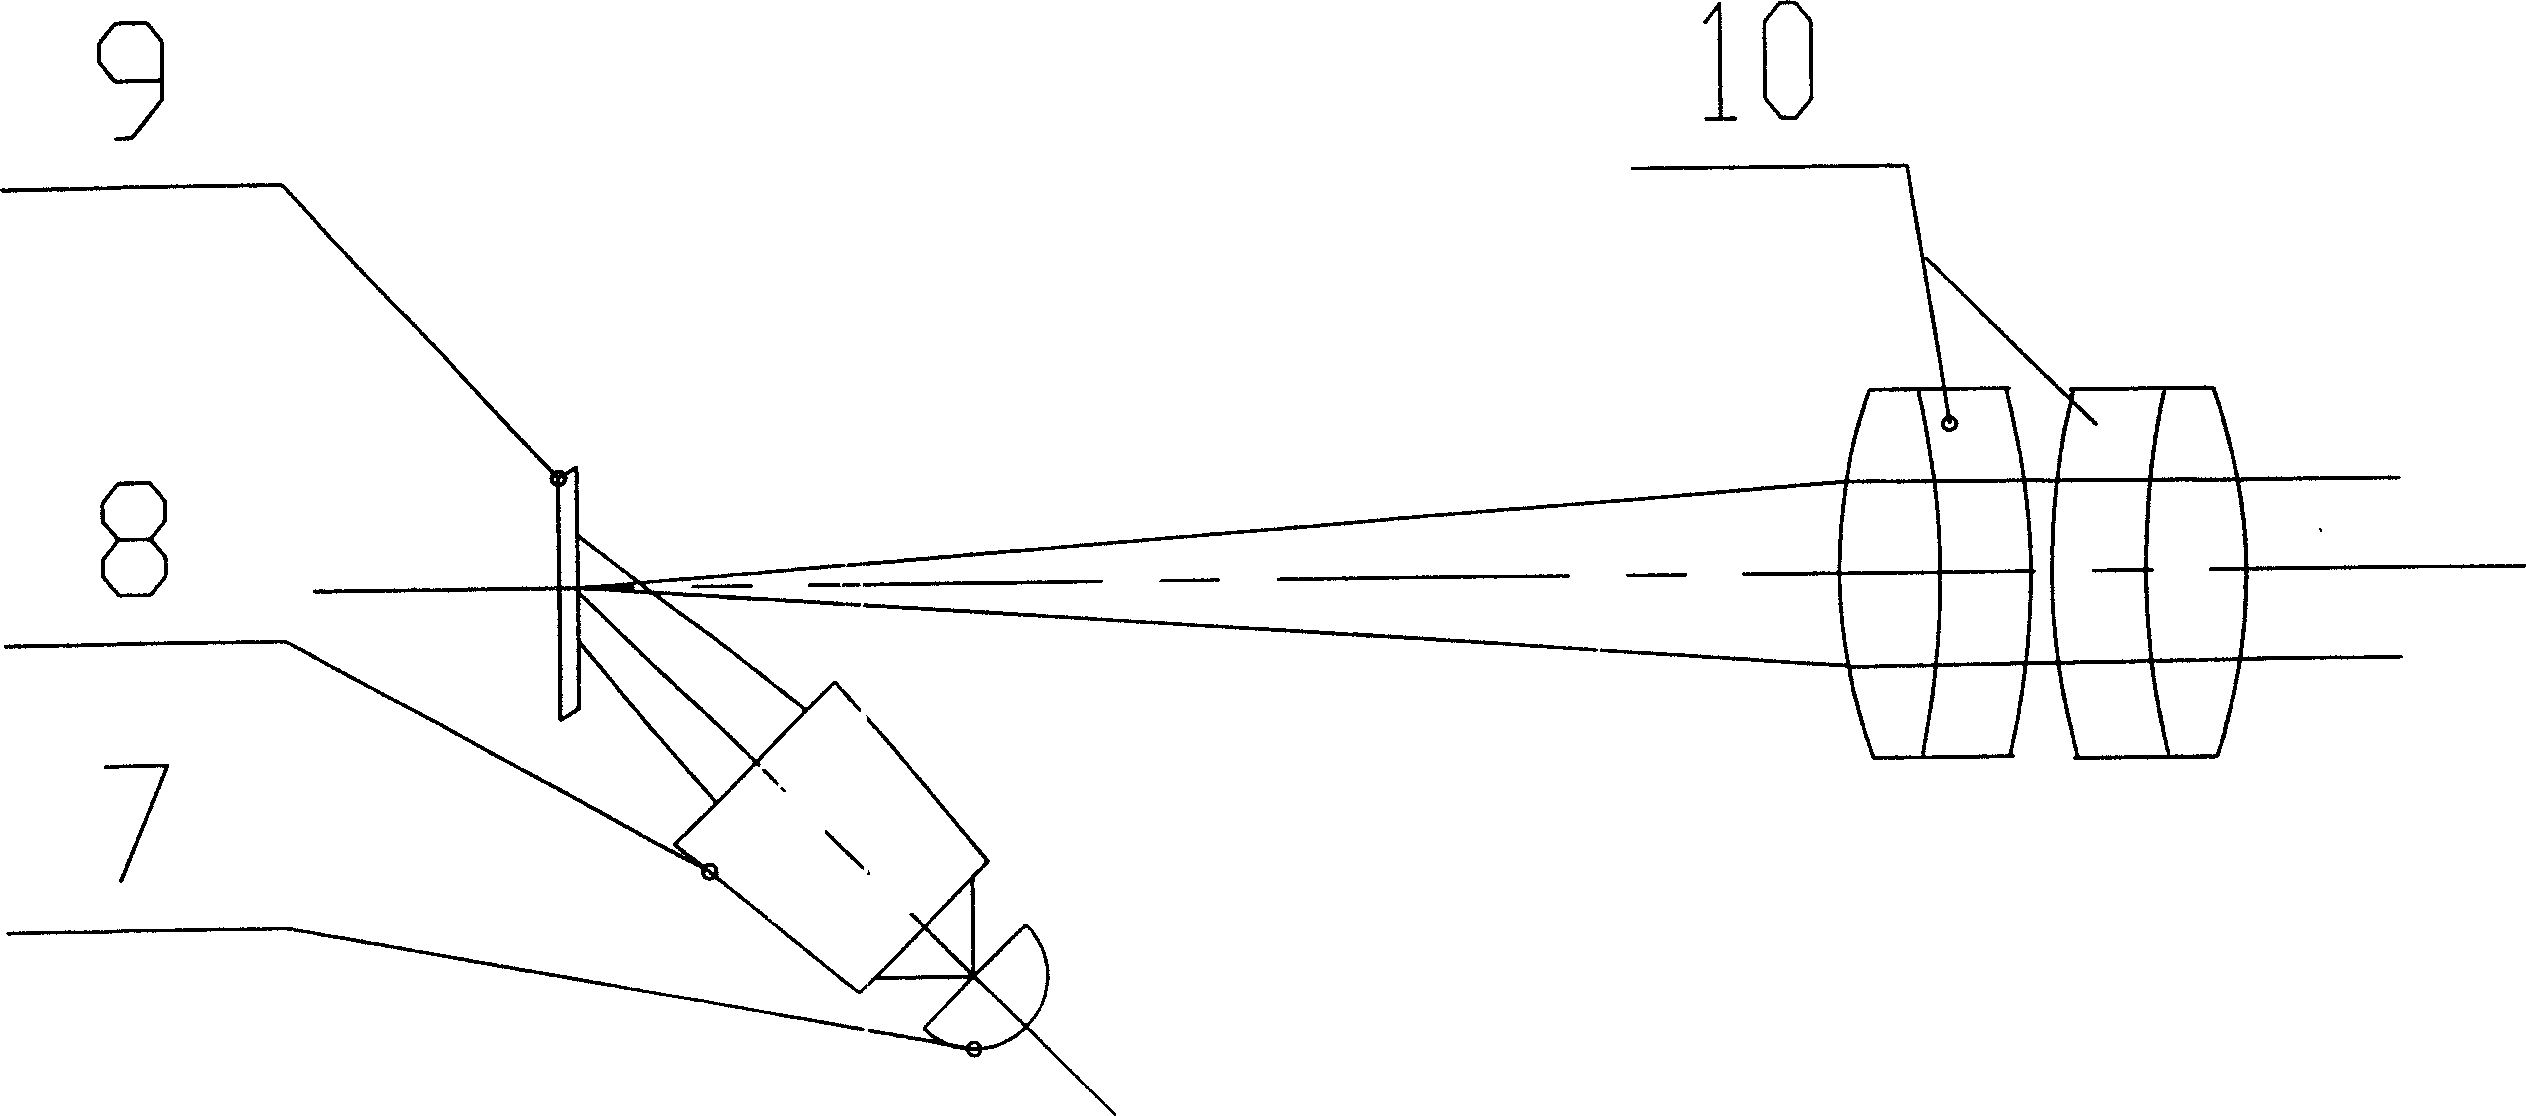 Optical system of small dynamic starlight analog device